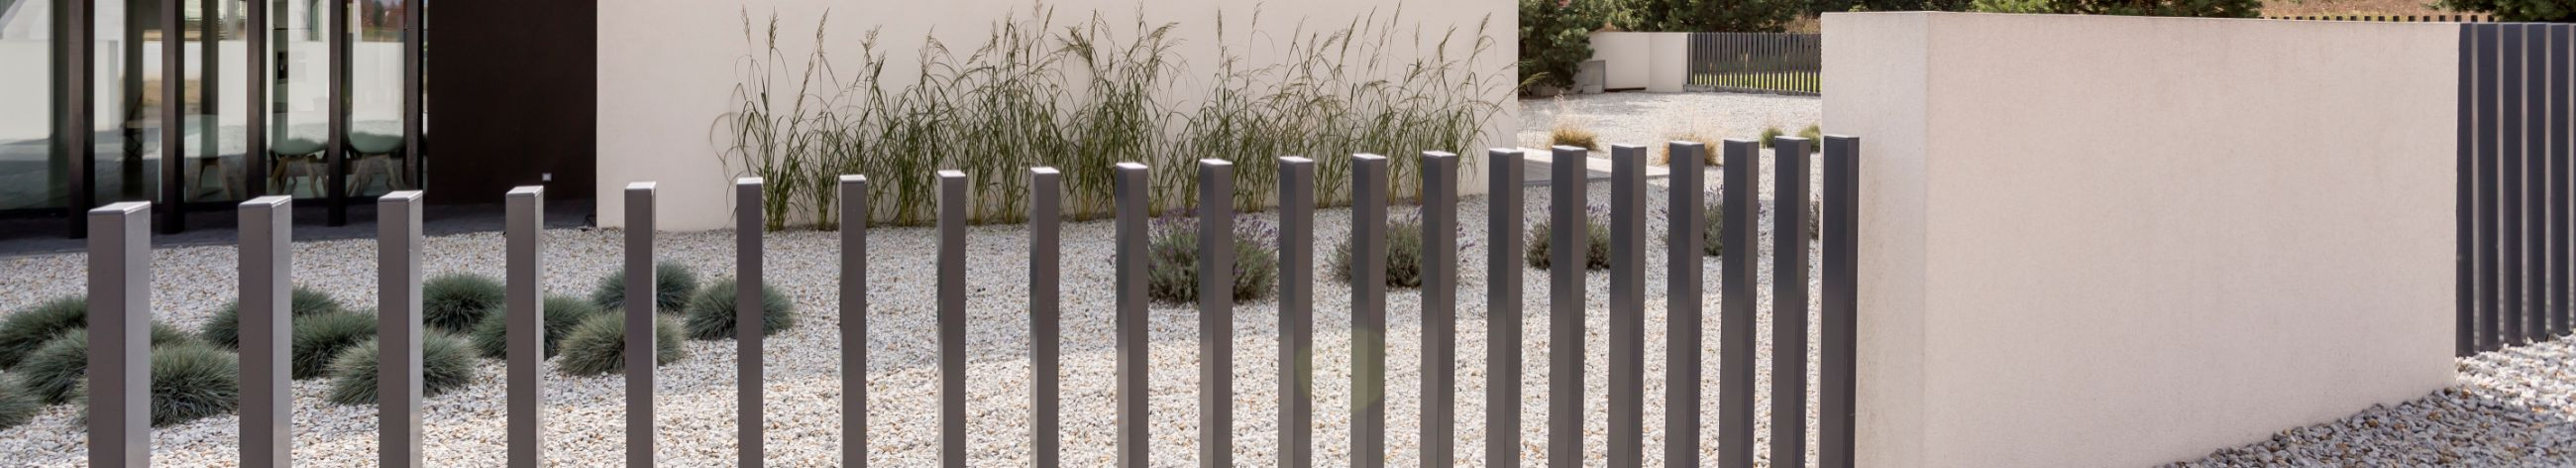 We provide comprehensive fencing services including construction, repair, and automation.